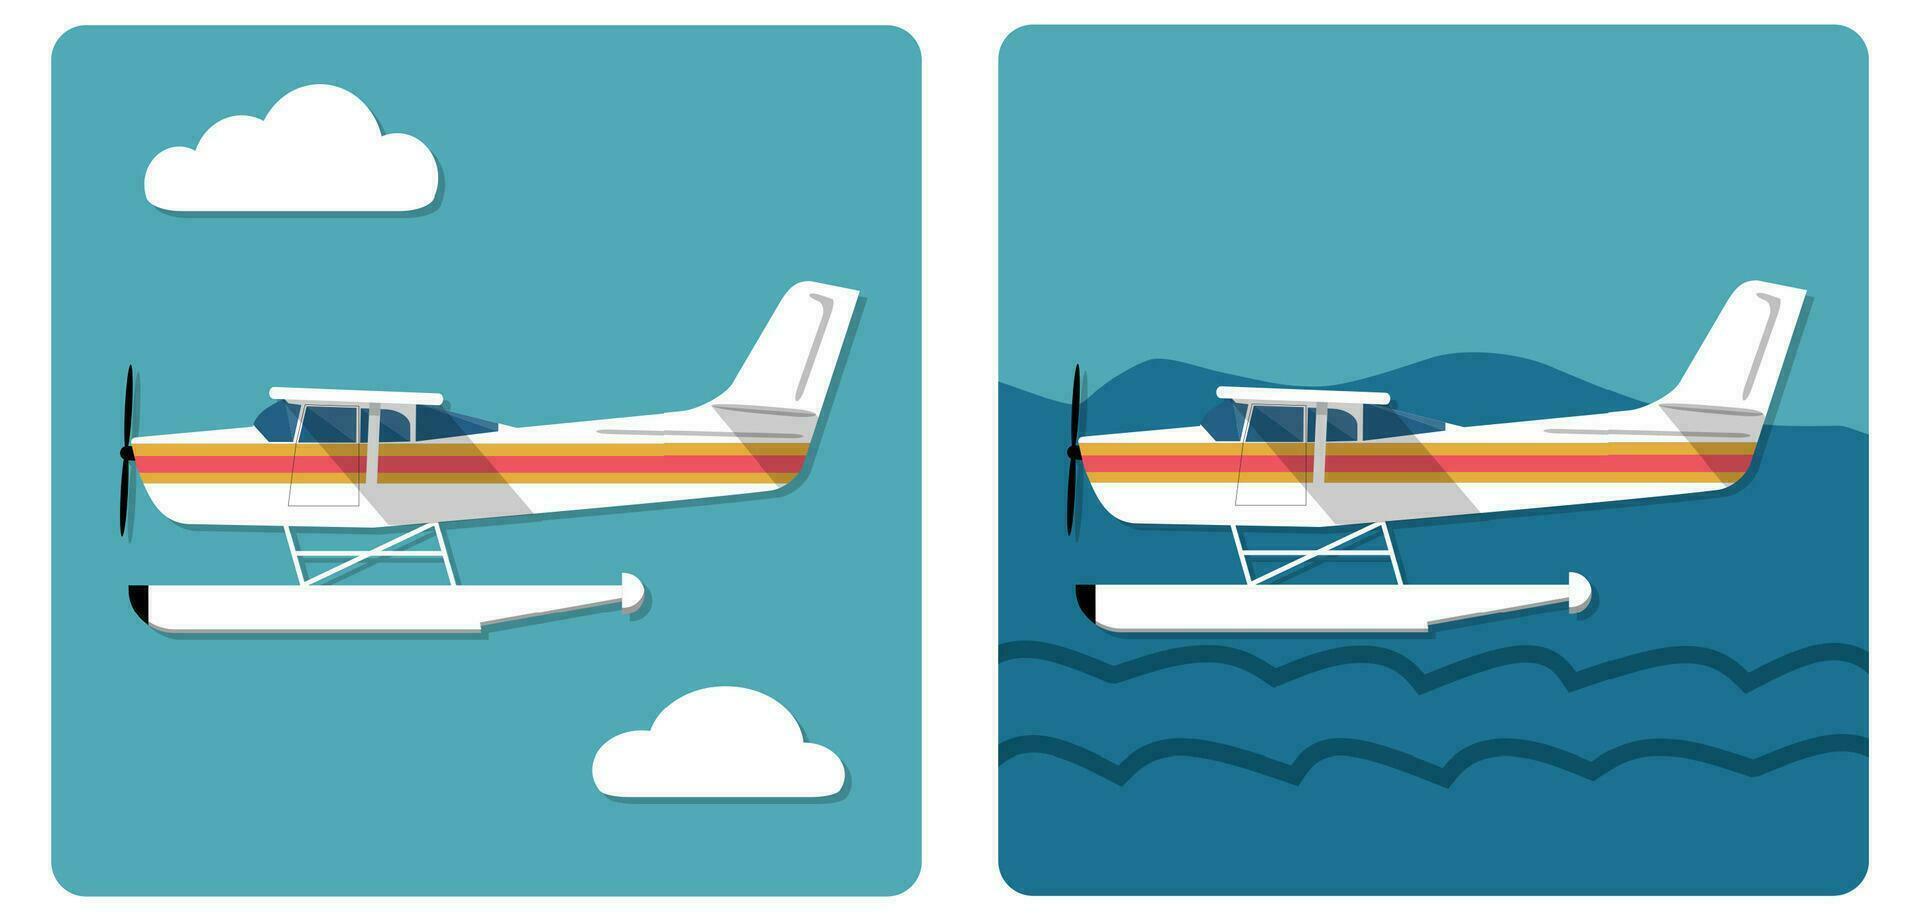 Cool flat design aviation amphibian plane landed on water and flying in the sky vector